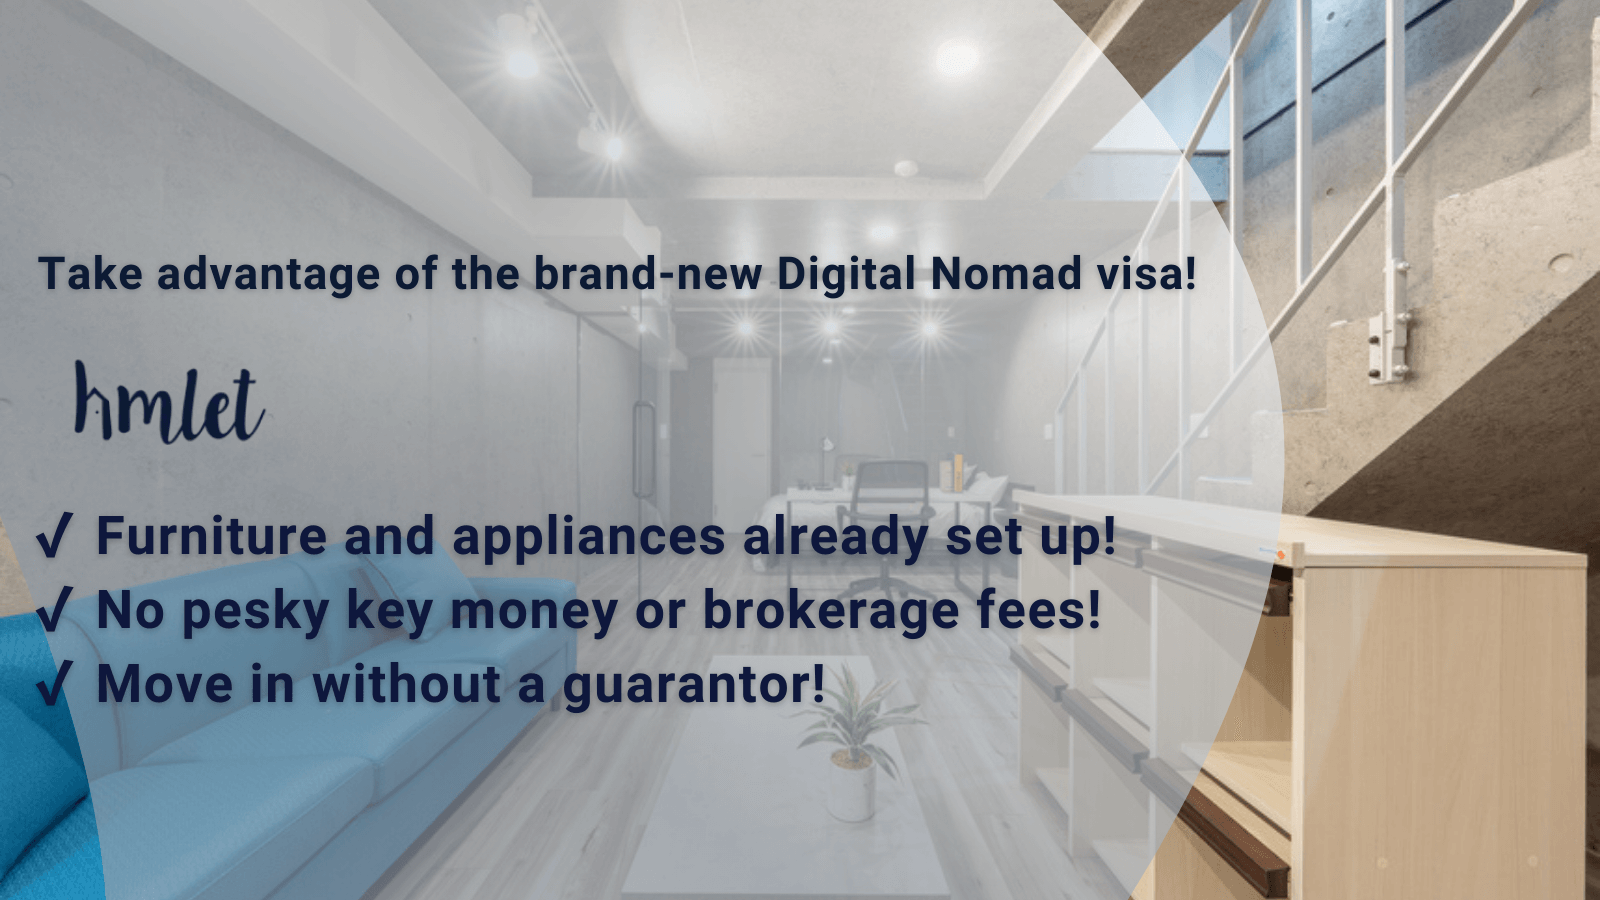 Japan's new Digital Nomad visa offers a 6-month hassle-free stay. For seamless living, try Hmlet Japan.